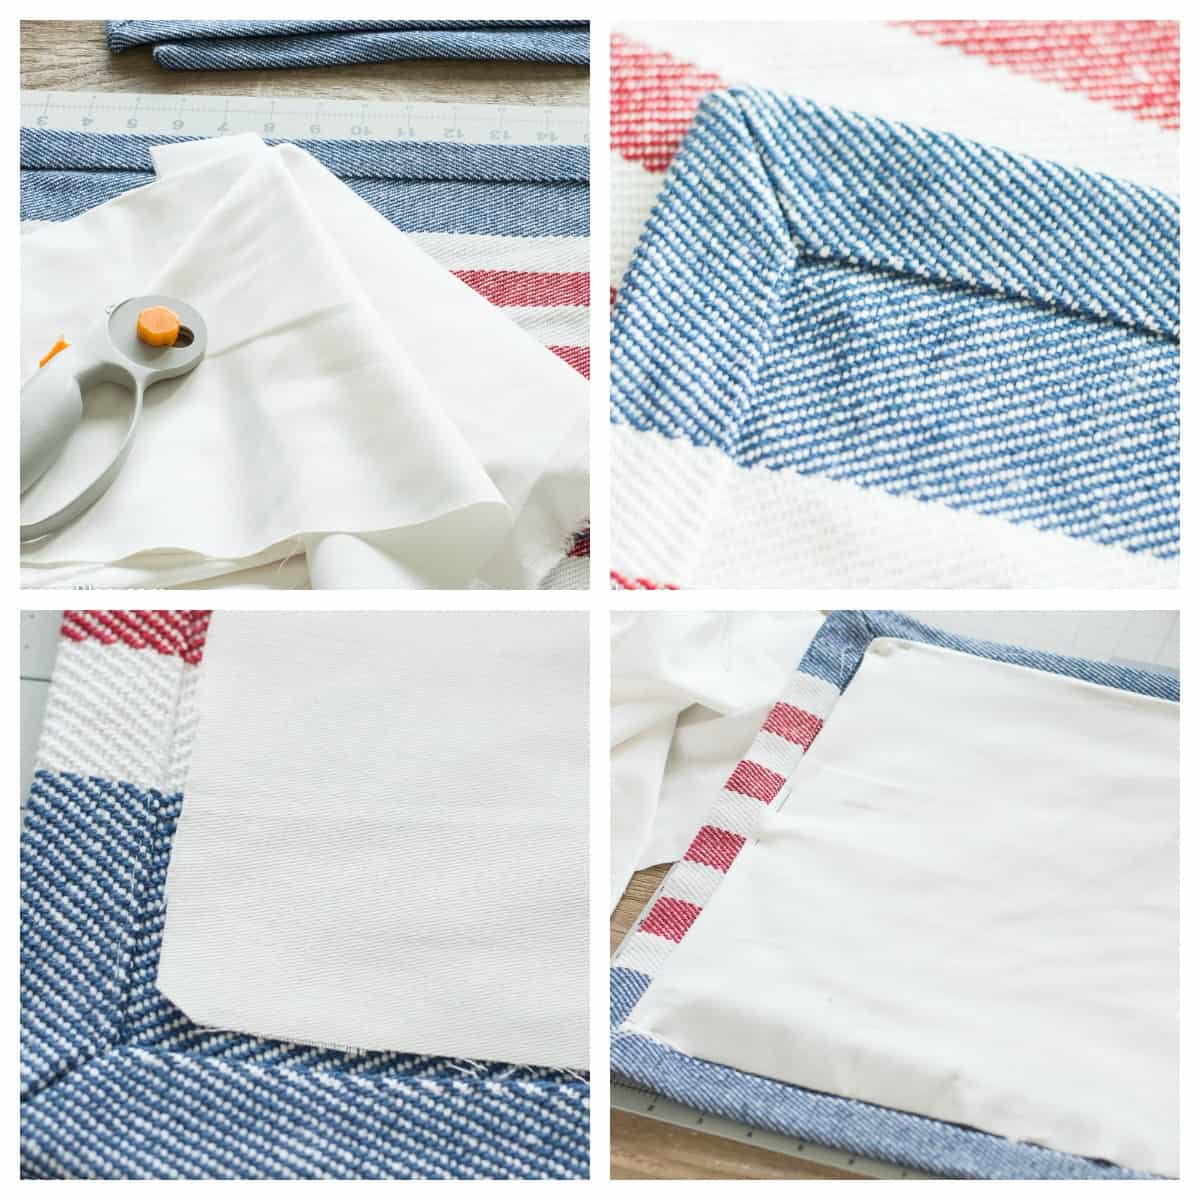 DIY patriotic throw pillow tutorial- cutting white fabric and pinning to underside of placemat